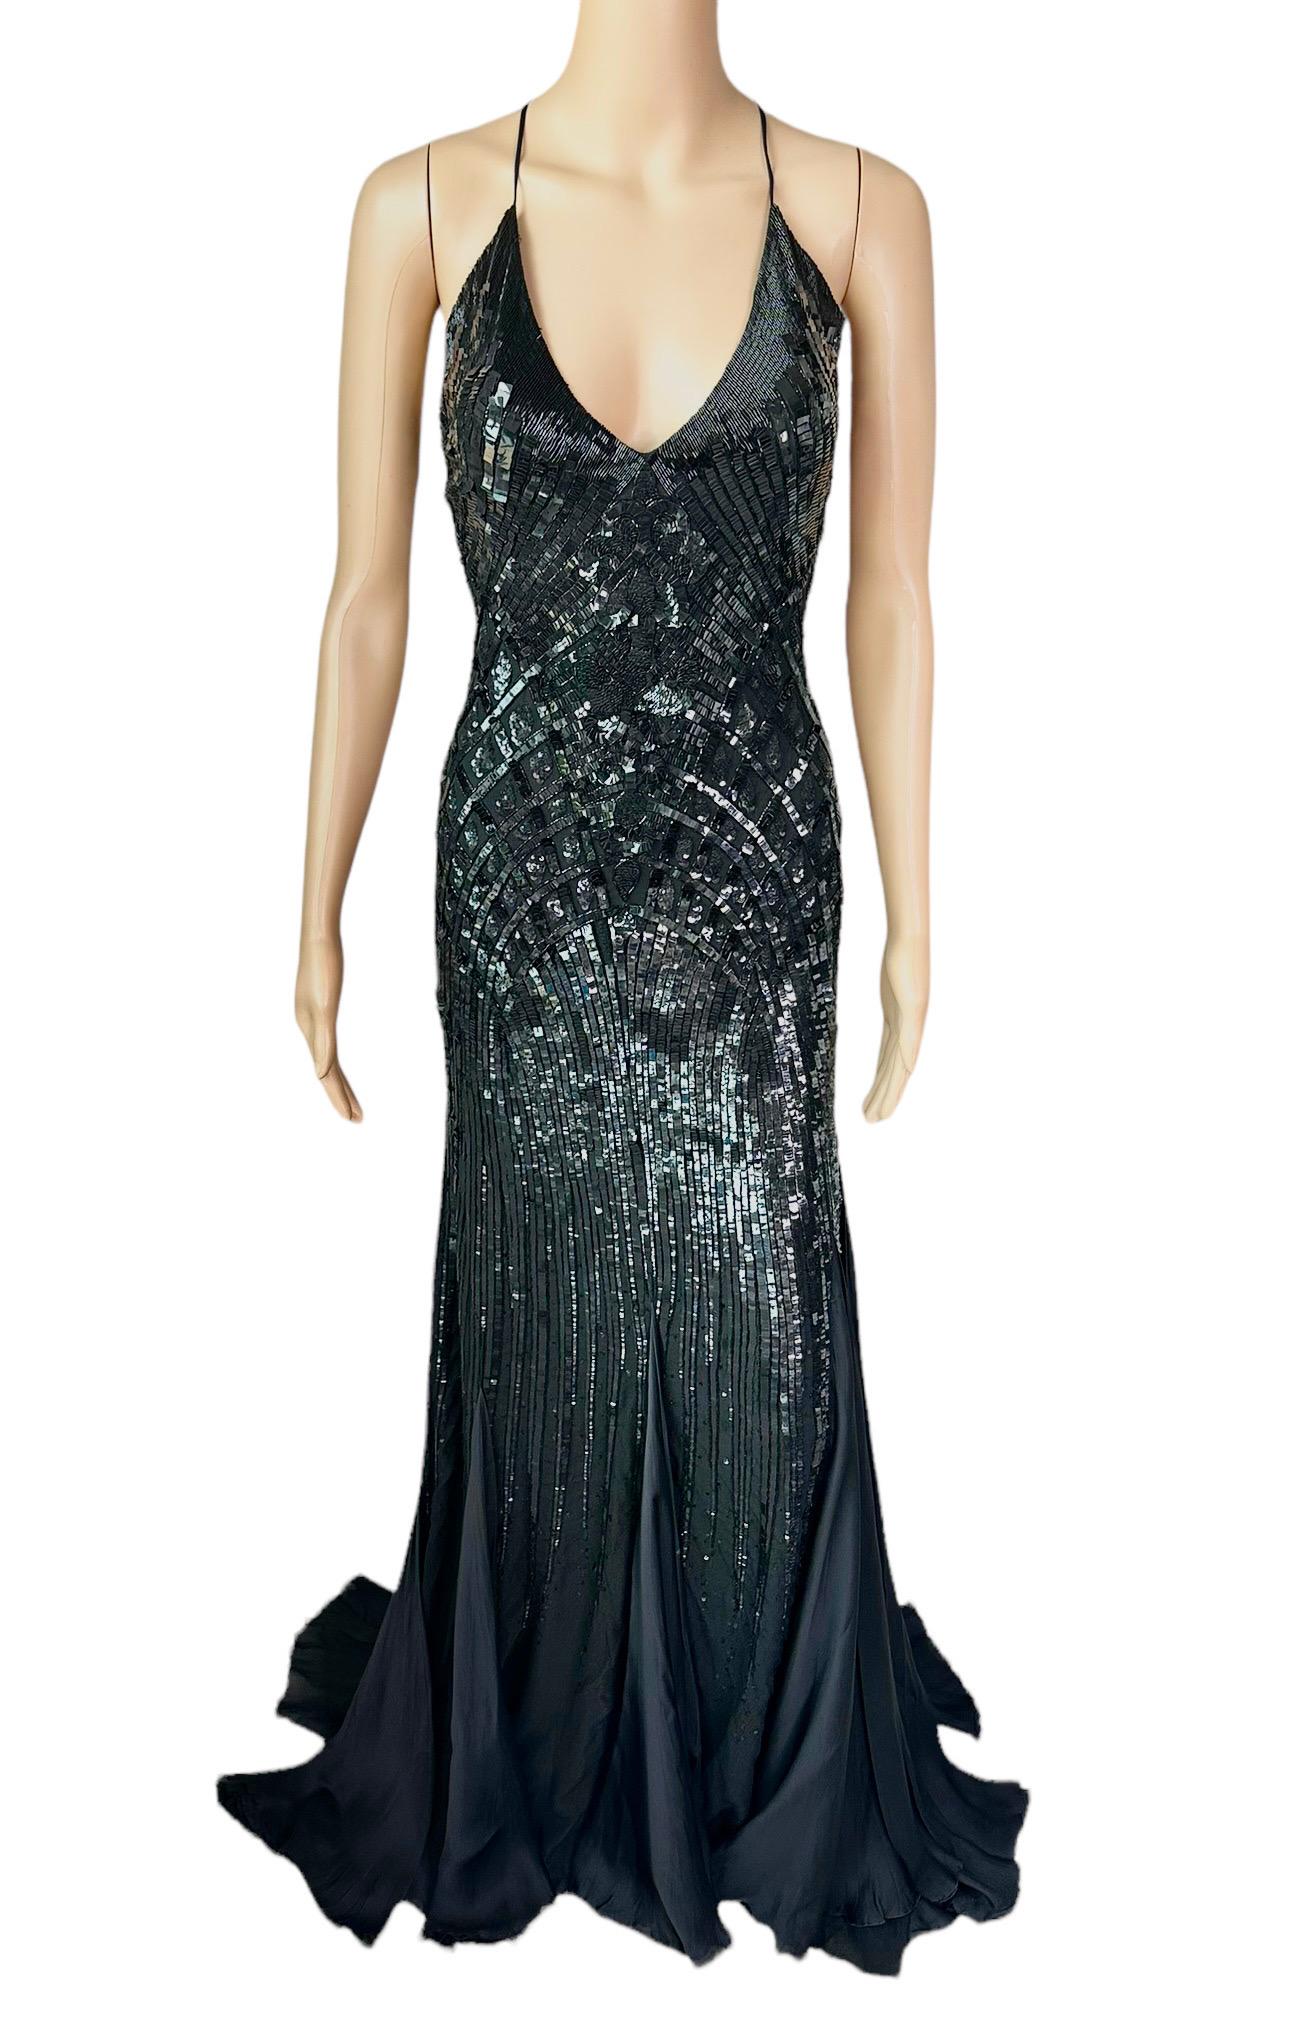 Roberto Cavalli S/S 2011 Embellished Plunged Lace Up Black Evening Dress Gown IT 38

Please note there are some loose and missing embellishments not noticeable when worn due to the otherwise heavy embellishment throughout the dress (see last 2